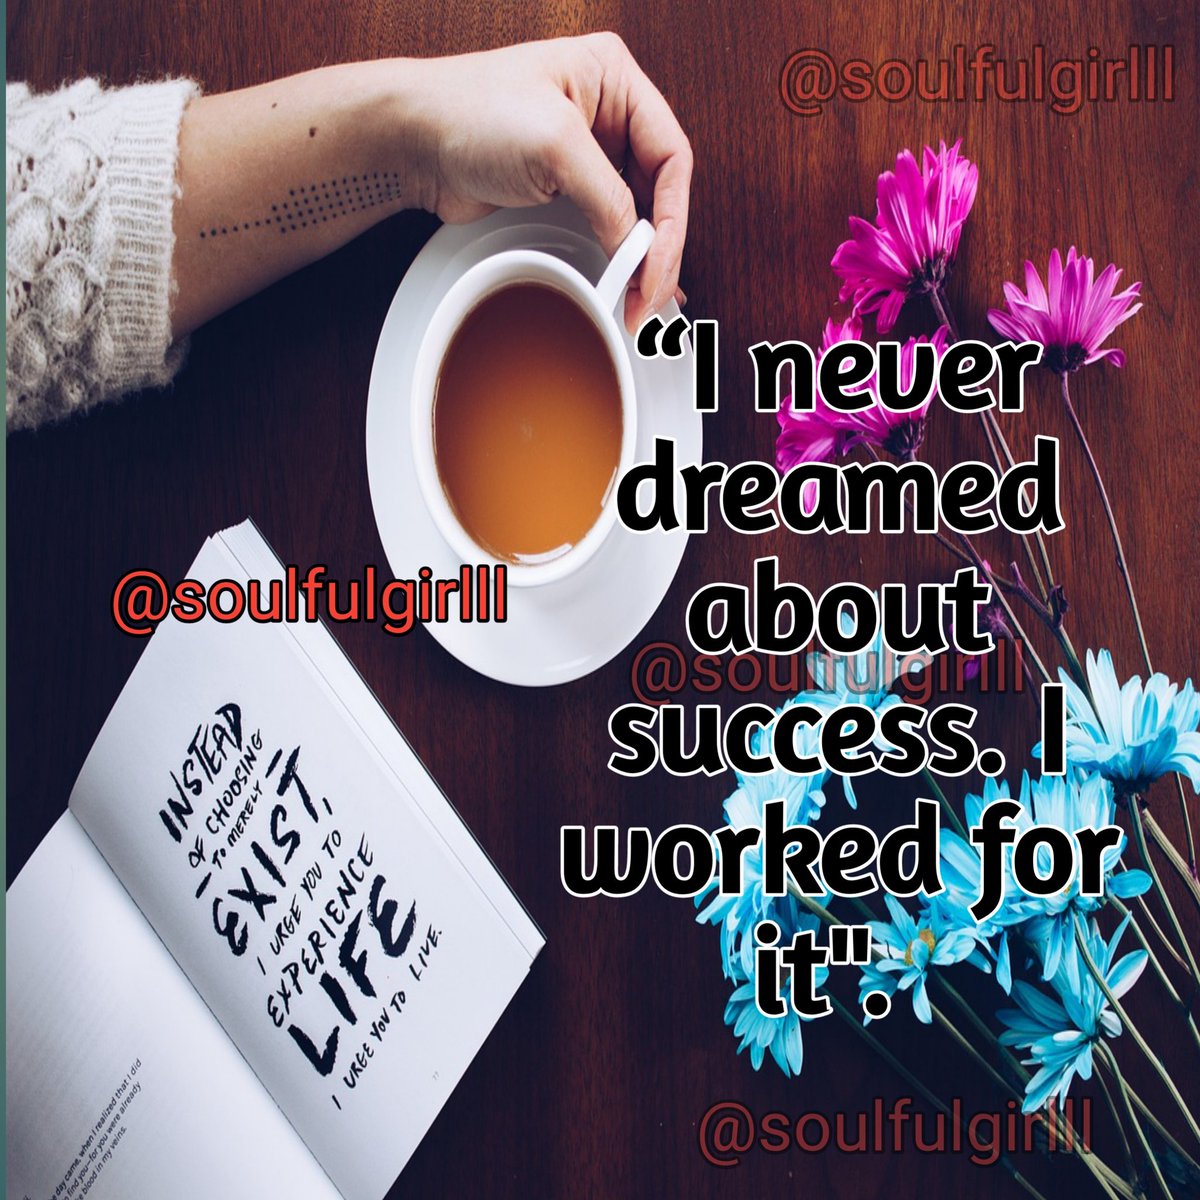 “I never dreamed about success. I worked for it.”

#MorningThoughts #MotivationalQuotes #LifeTips #Motivation #QuoteOfTheDay #ThoughtOfTheDay #MotivationalQuotesDaily  #InspirationalQuotes #thursdayvibes #ThursdayMotivation #quotes #quote #inspirationalquotes  #thursdaymorning…